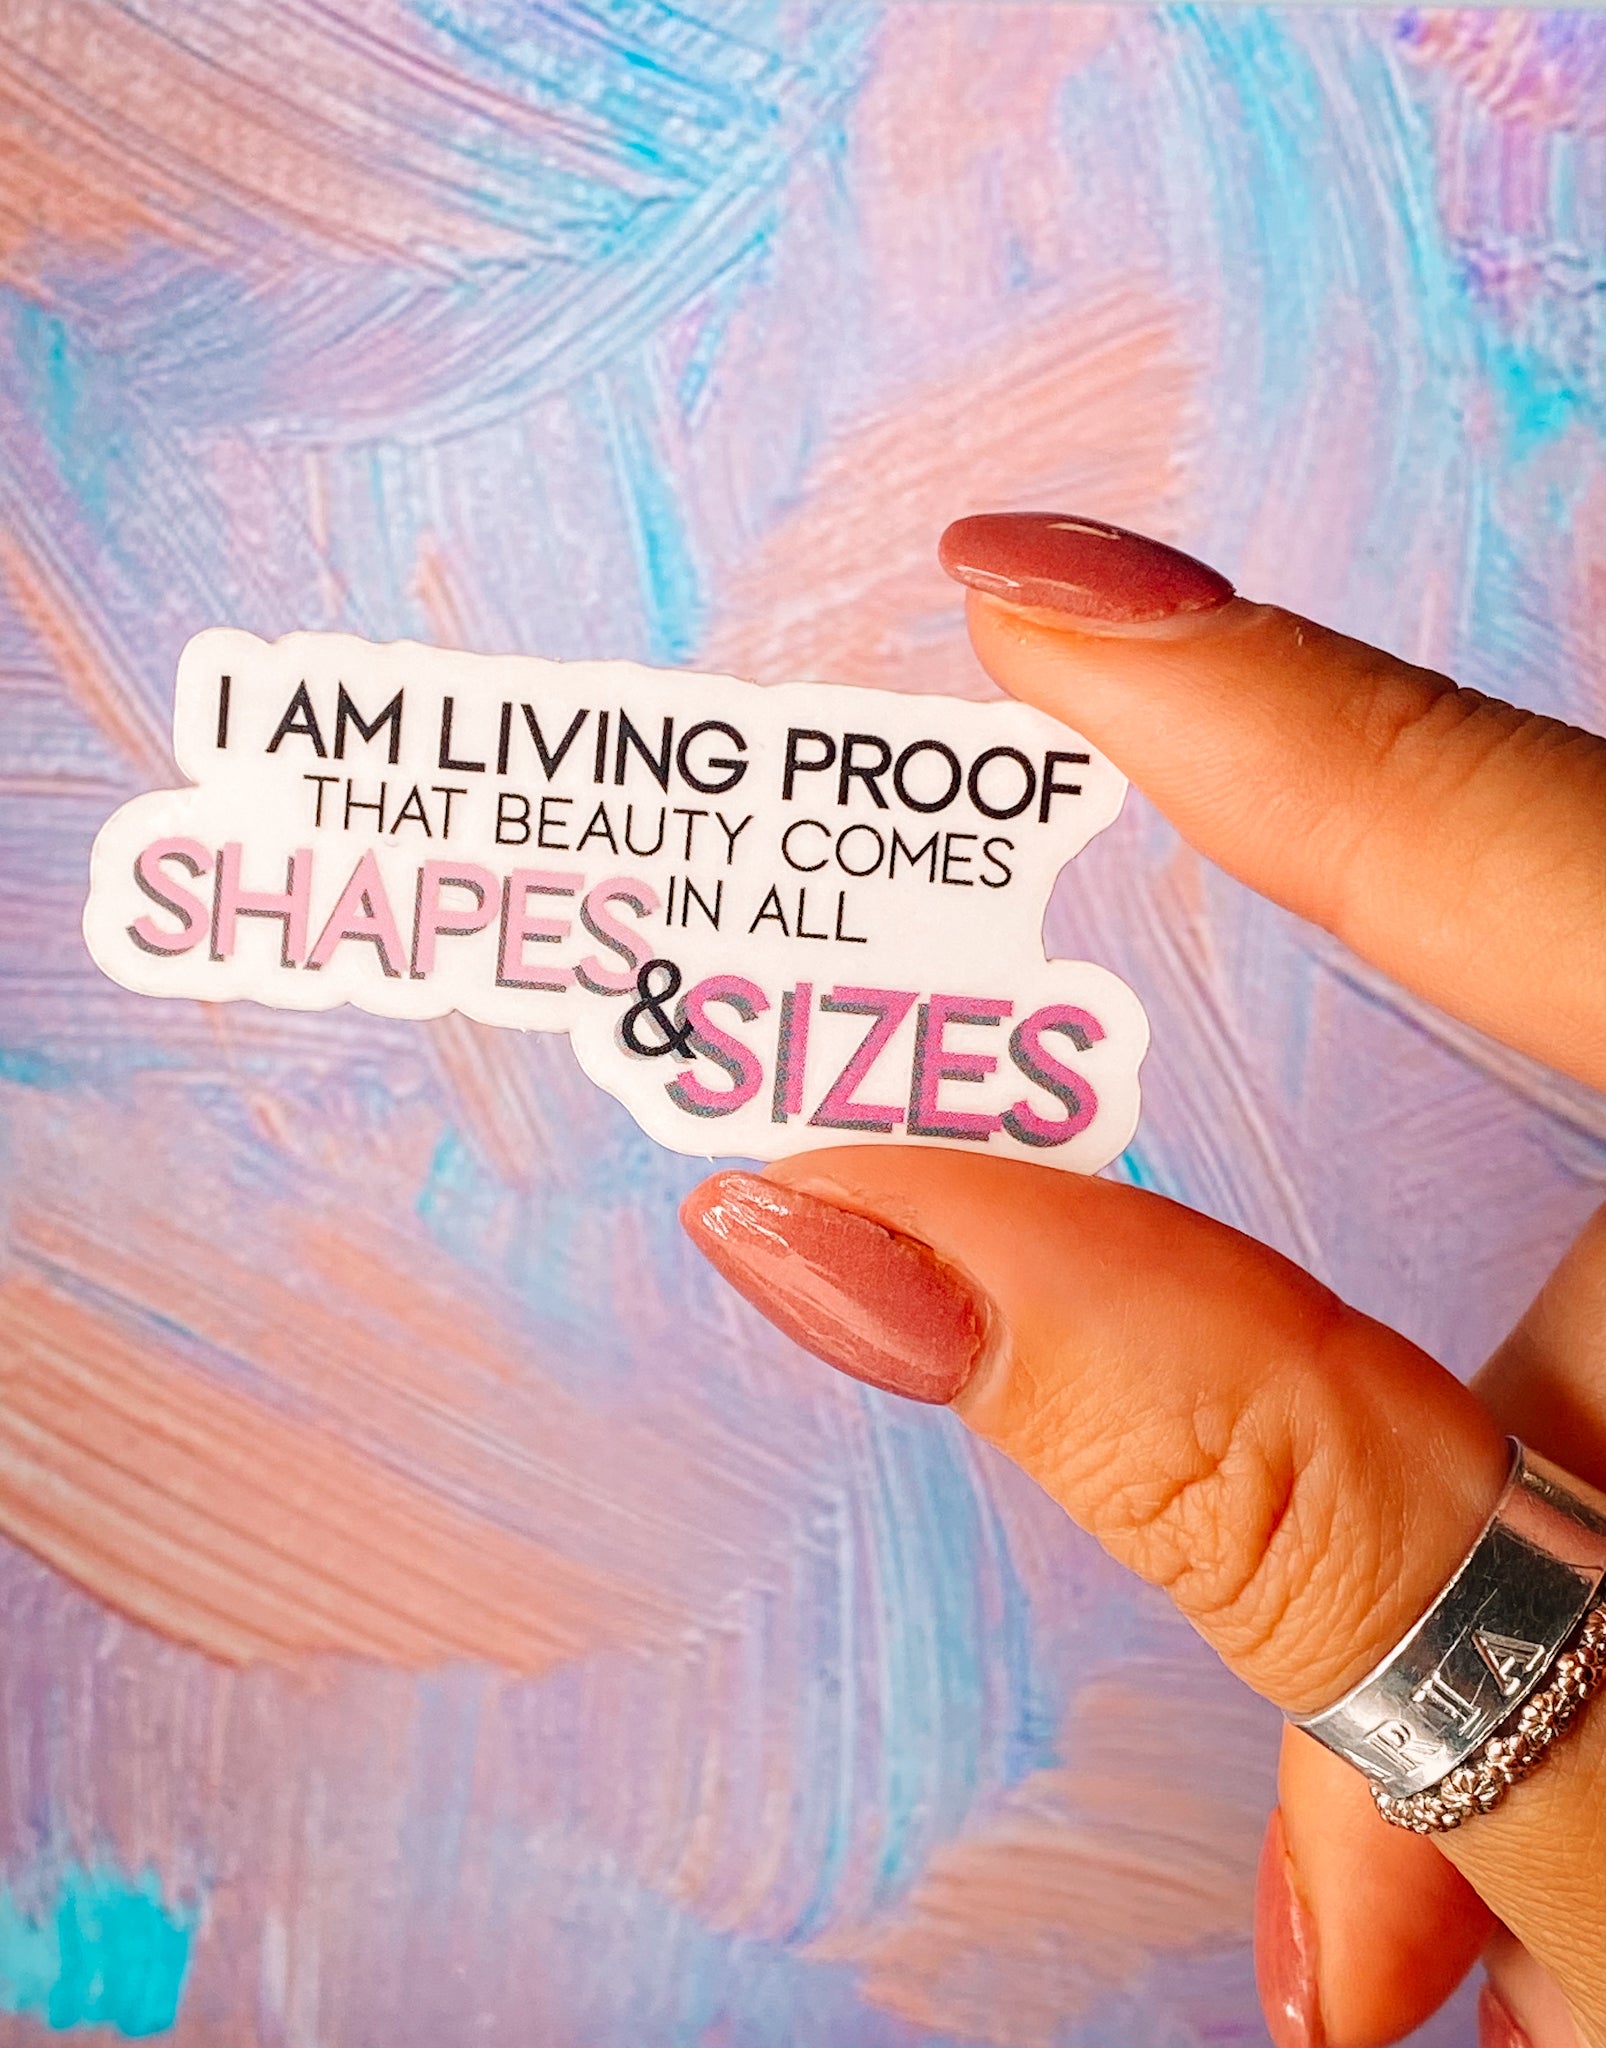 STICKER- "Beauty comes in all shapes & sizes"